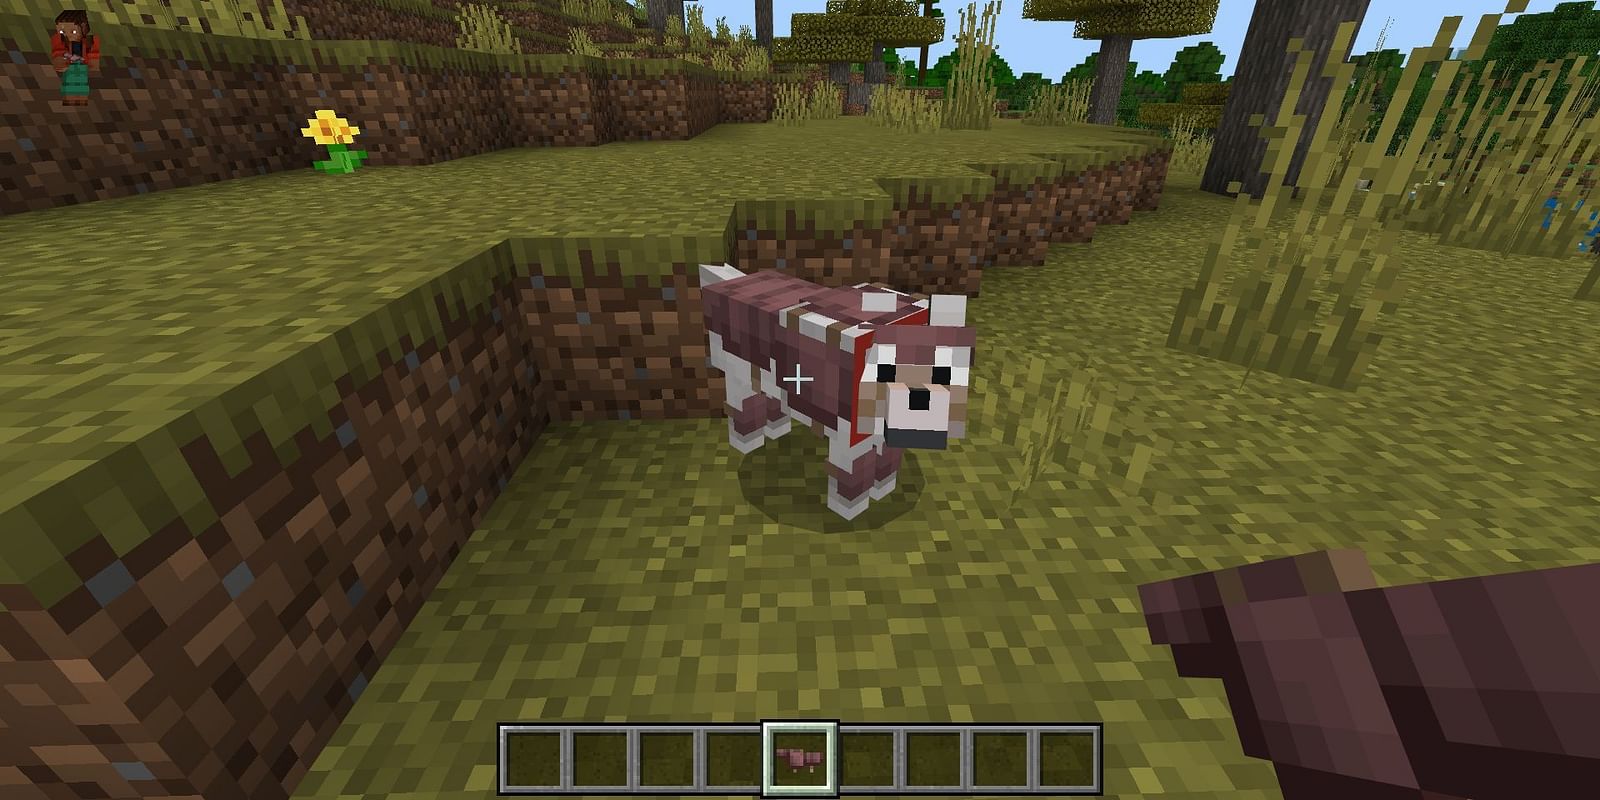 What do armadillos eat in Minecraft?